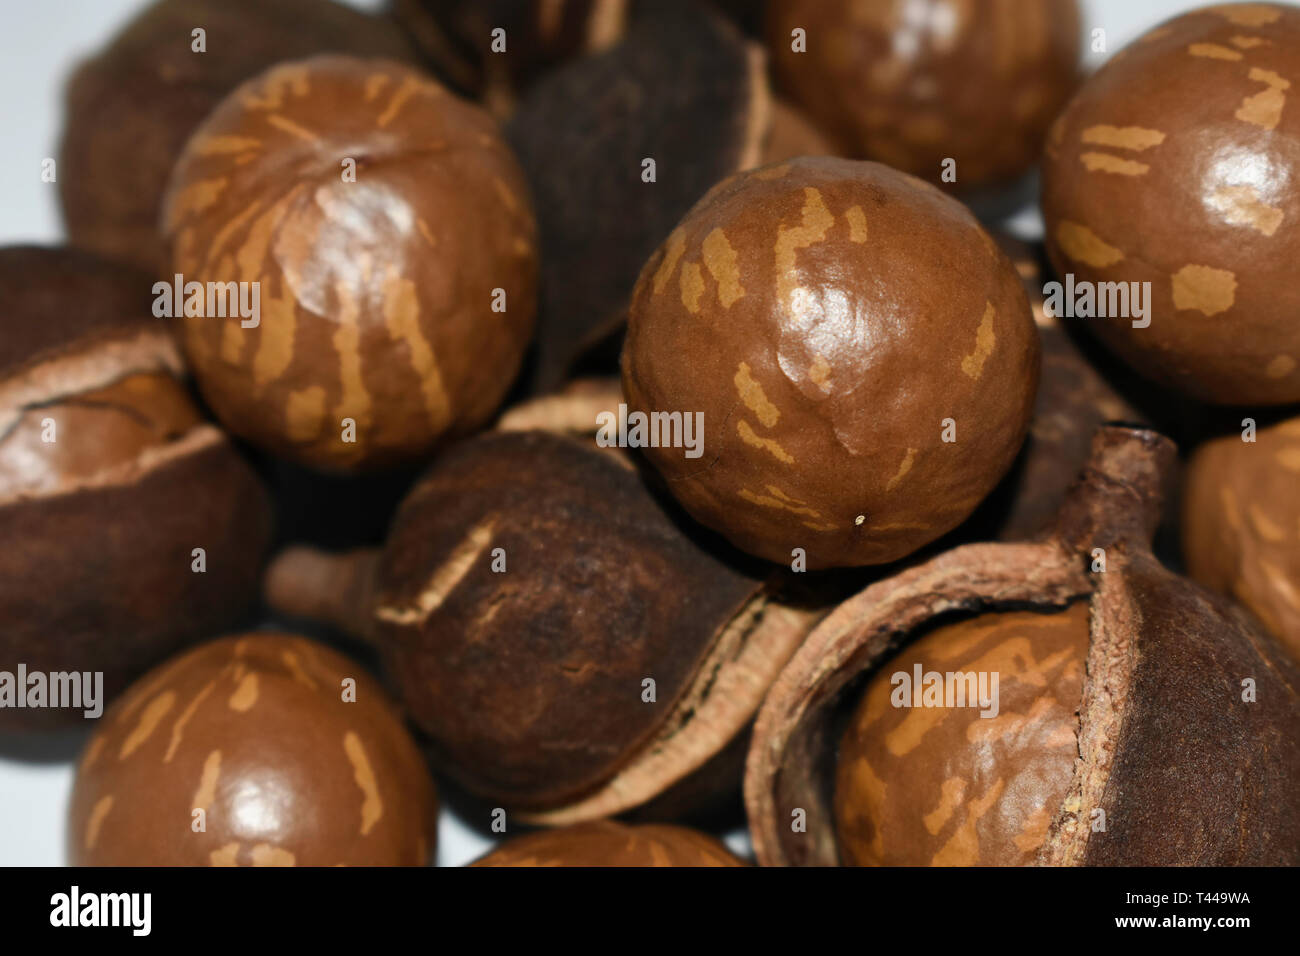 Natural Macadamia Tree Nuts In Shell And Husk Stock Photo